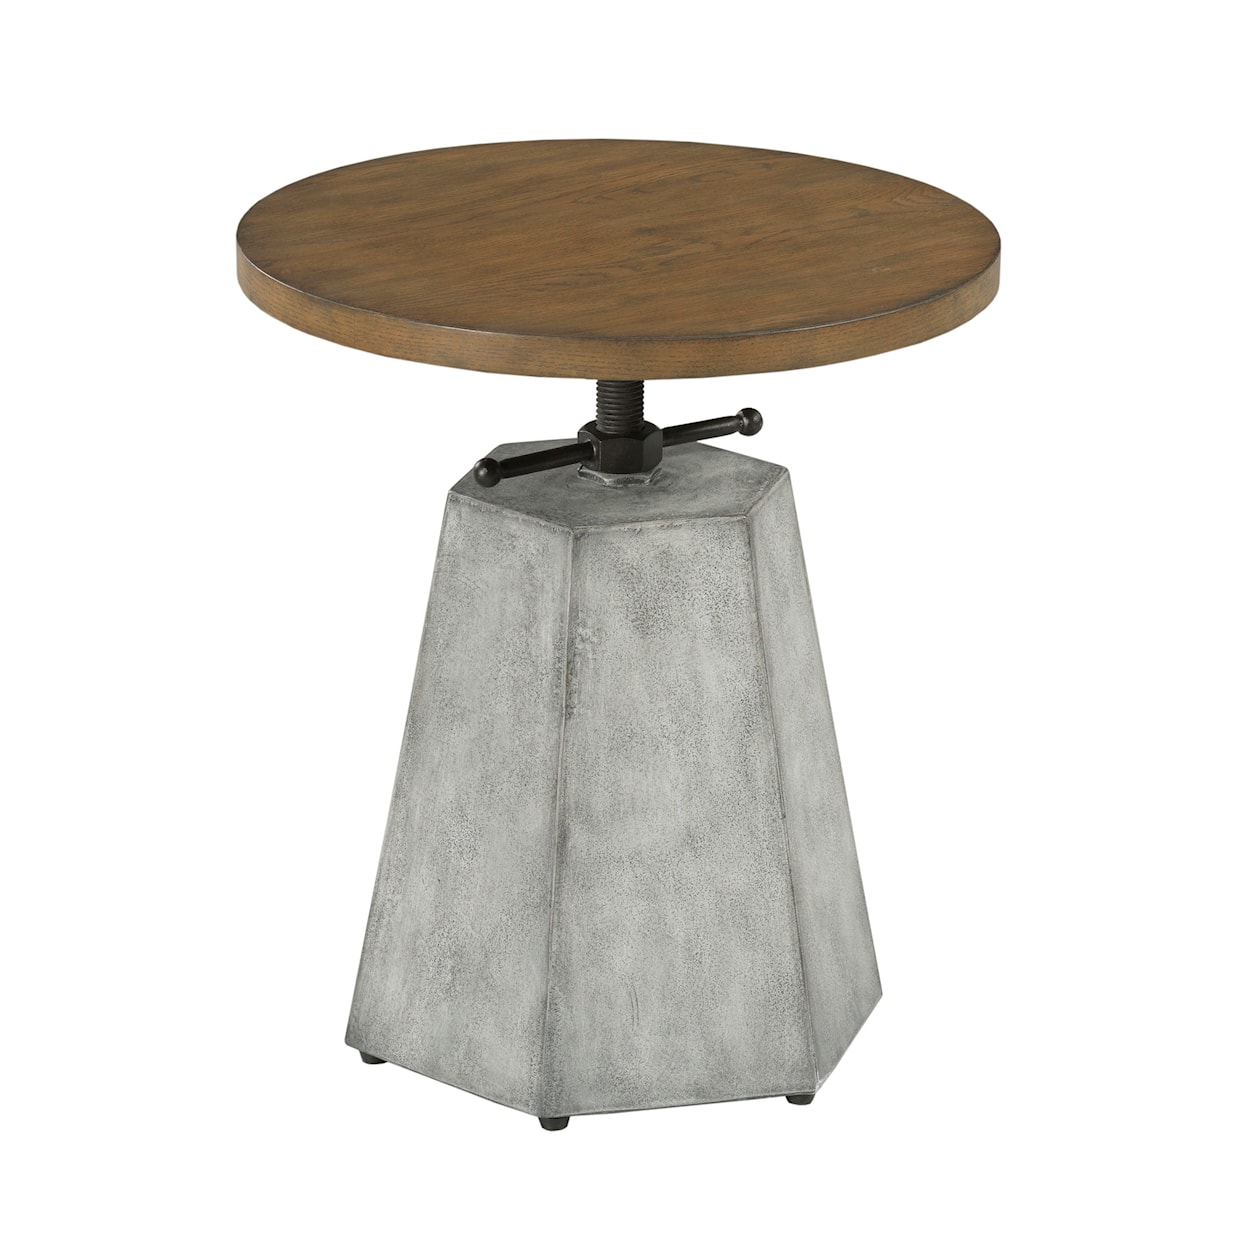 Hammary Olmsted Adjustable Accent Table